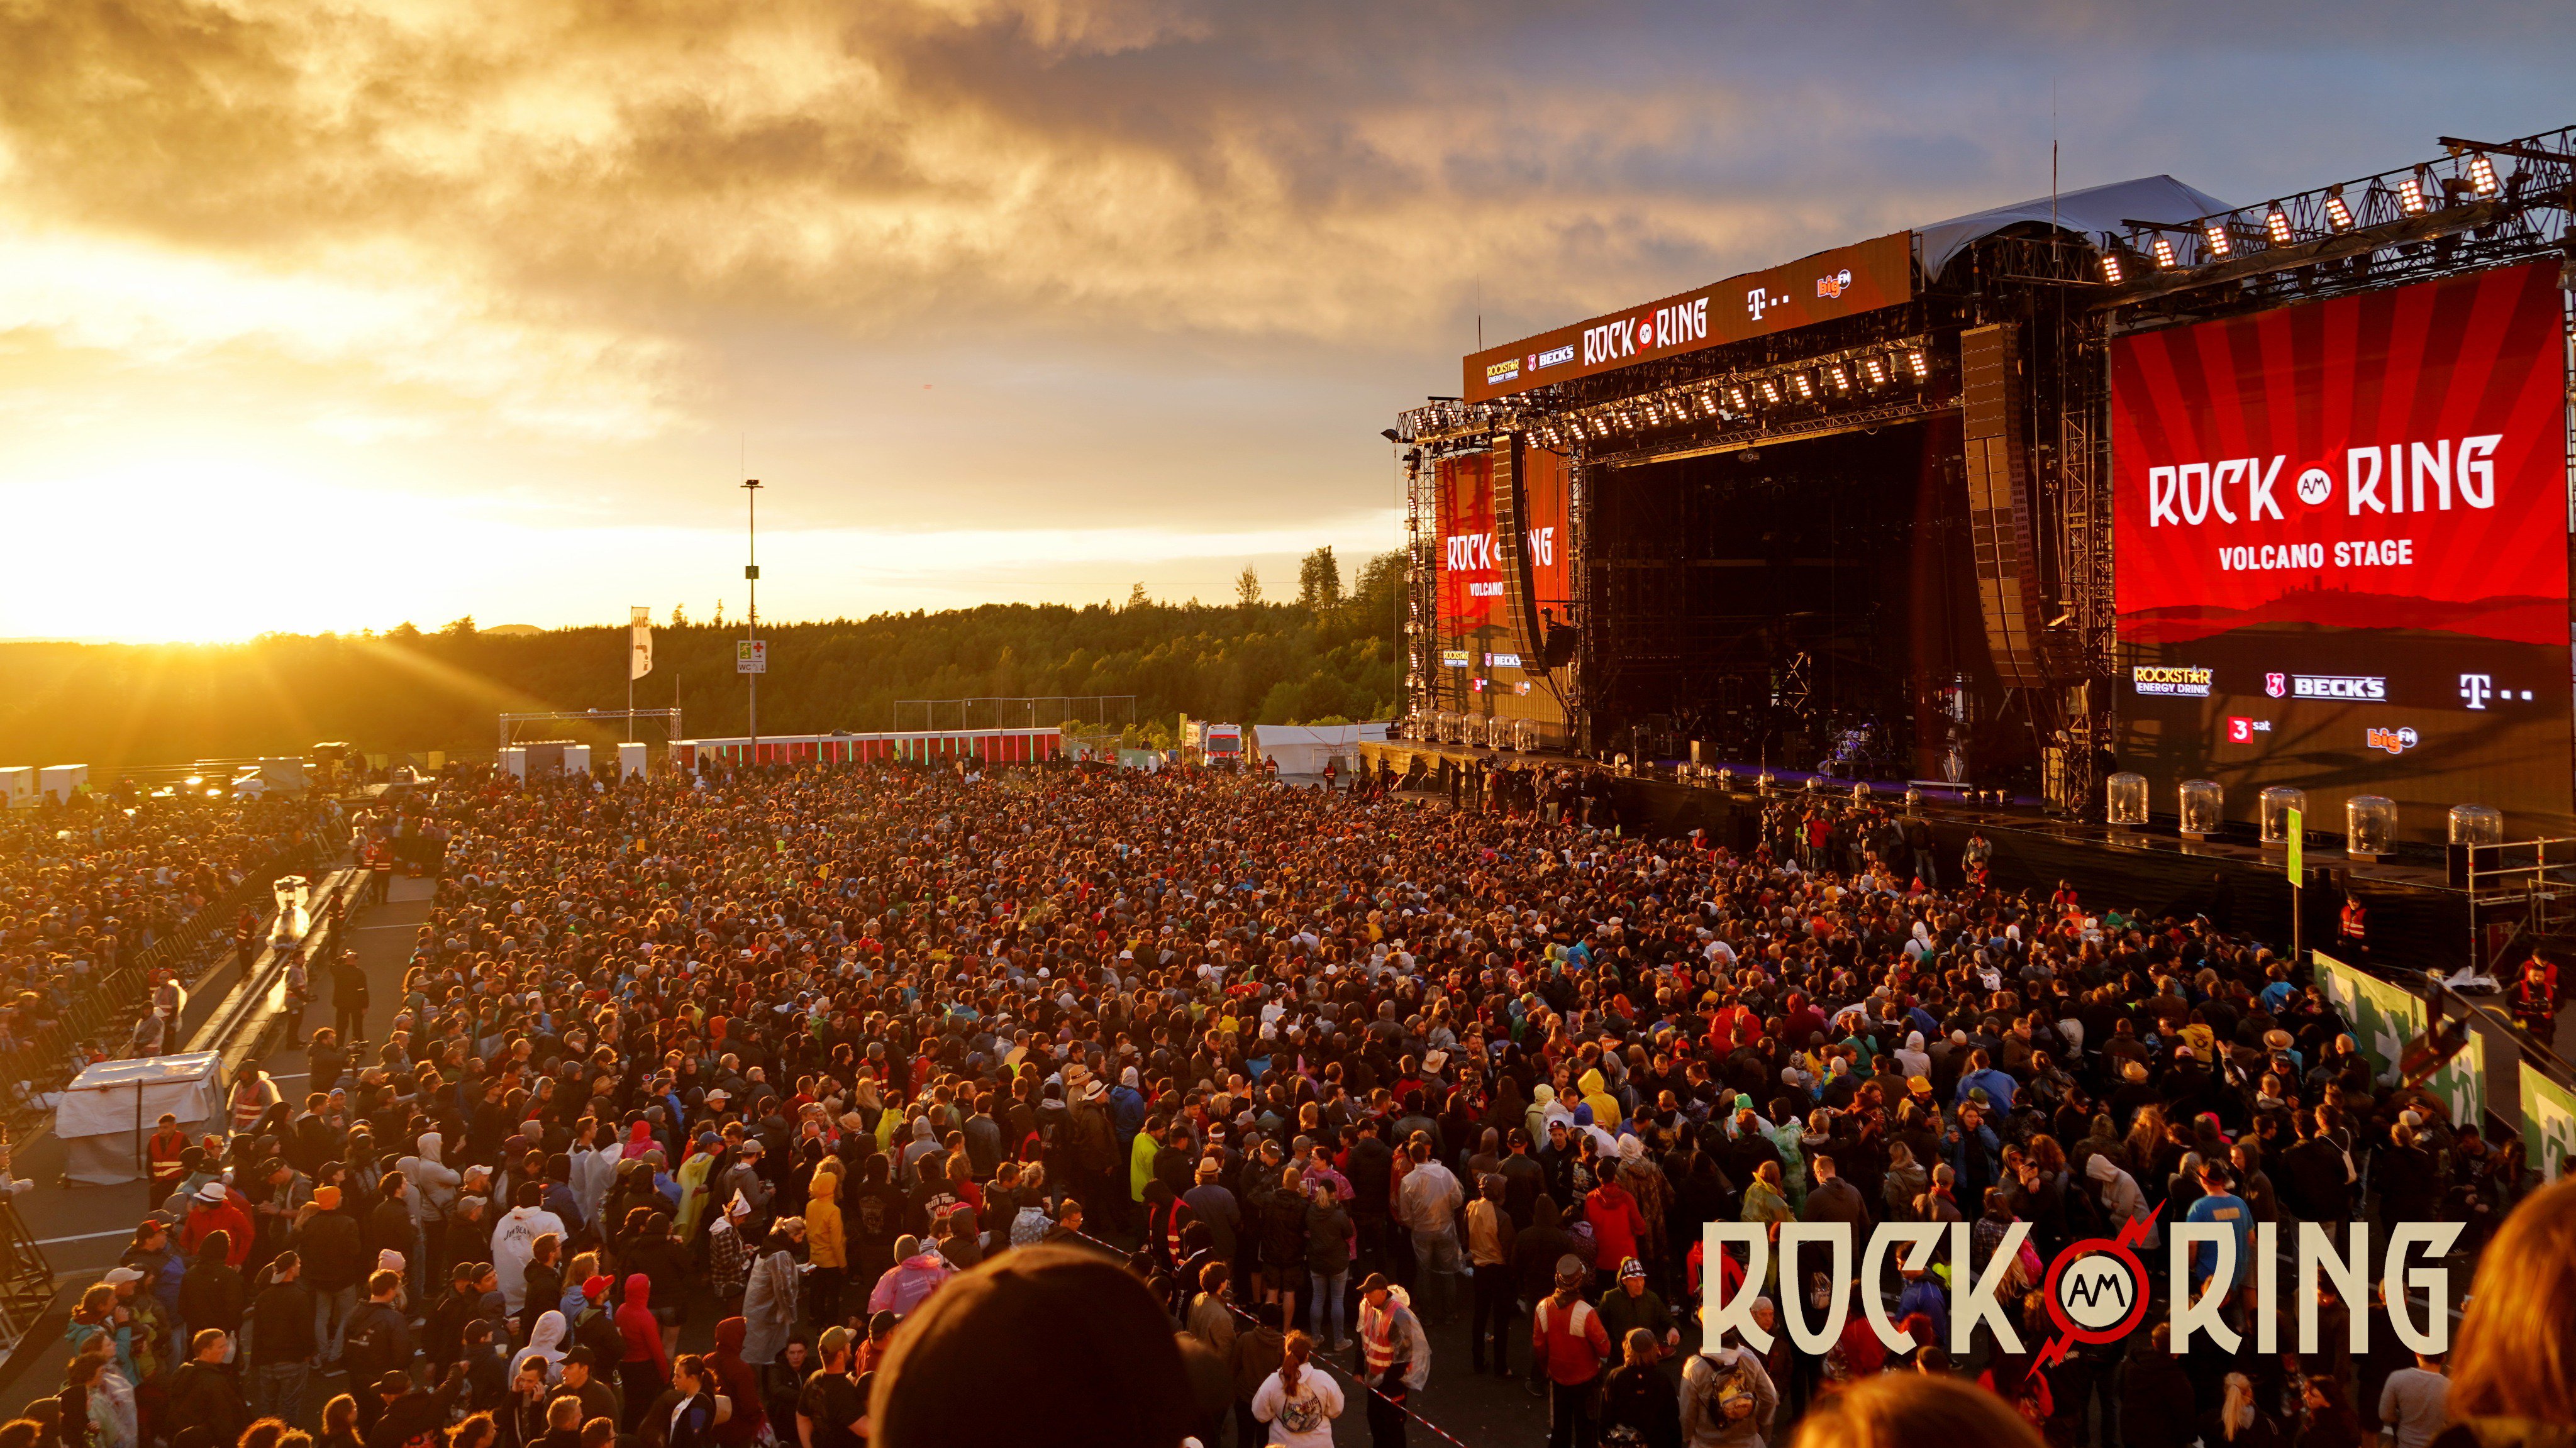 pensioen Oprechtheid langs Nürburgring on Twitter: "You rocked!🤘 Thanks @rockamring, it was an honor.  ➡ From now on you can join for Rock am Ring 2020! ➡ Check:  https://t.co/cZRoLZCtyB #rar2020 #nring https://t.co/jFBP0QVvOX" / Twitter